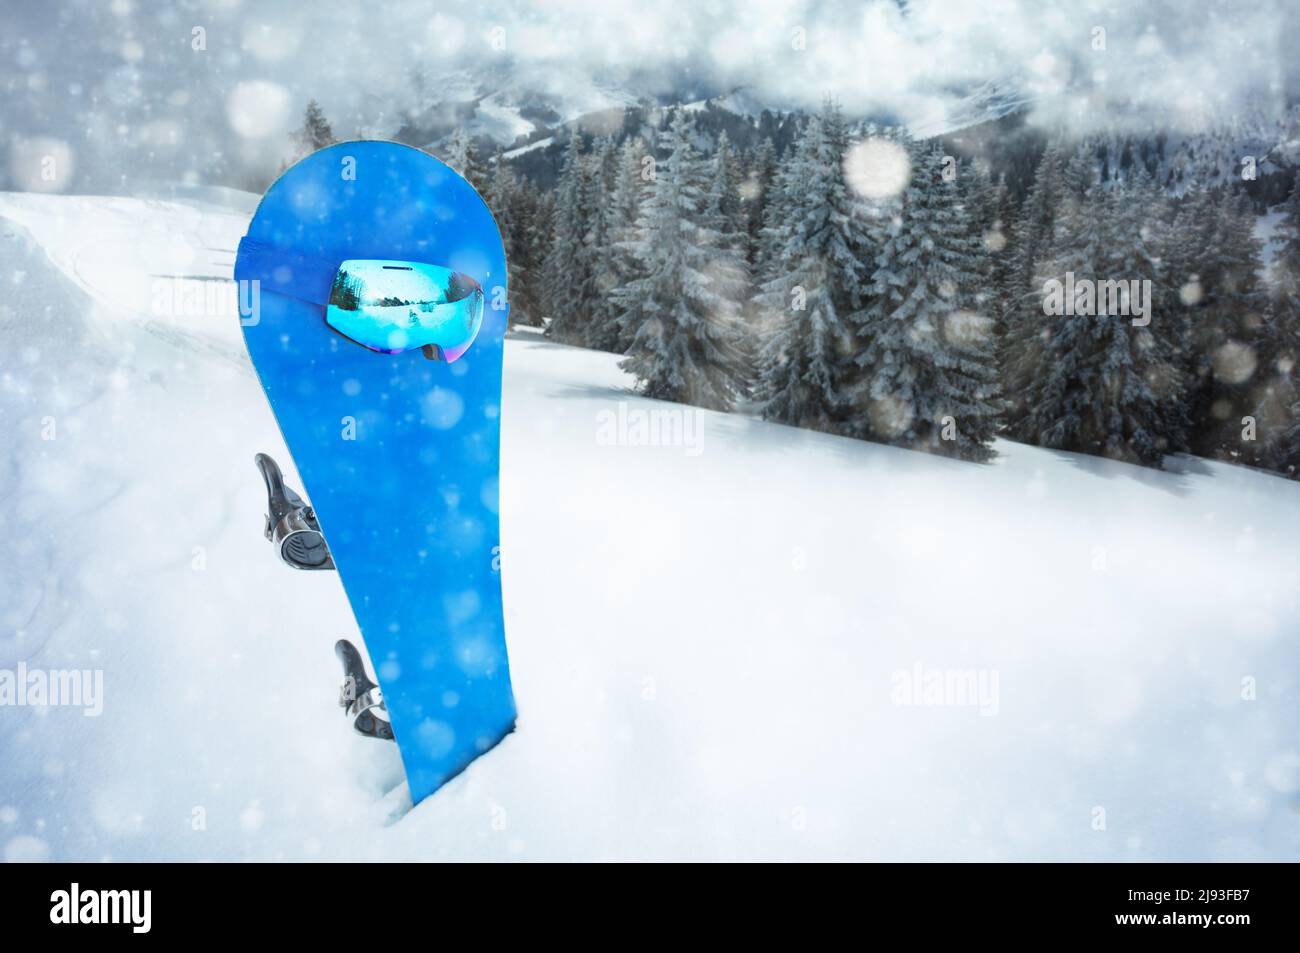 Ski sport mask on the blue snowboard over mountain track Stock Photo